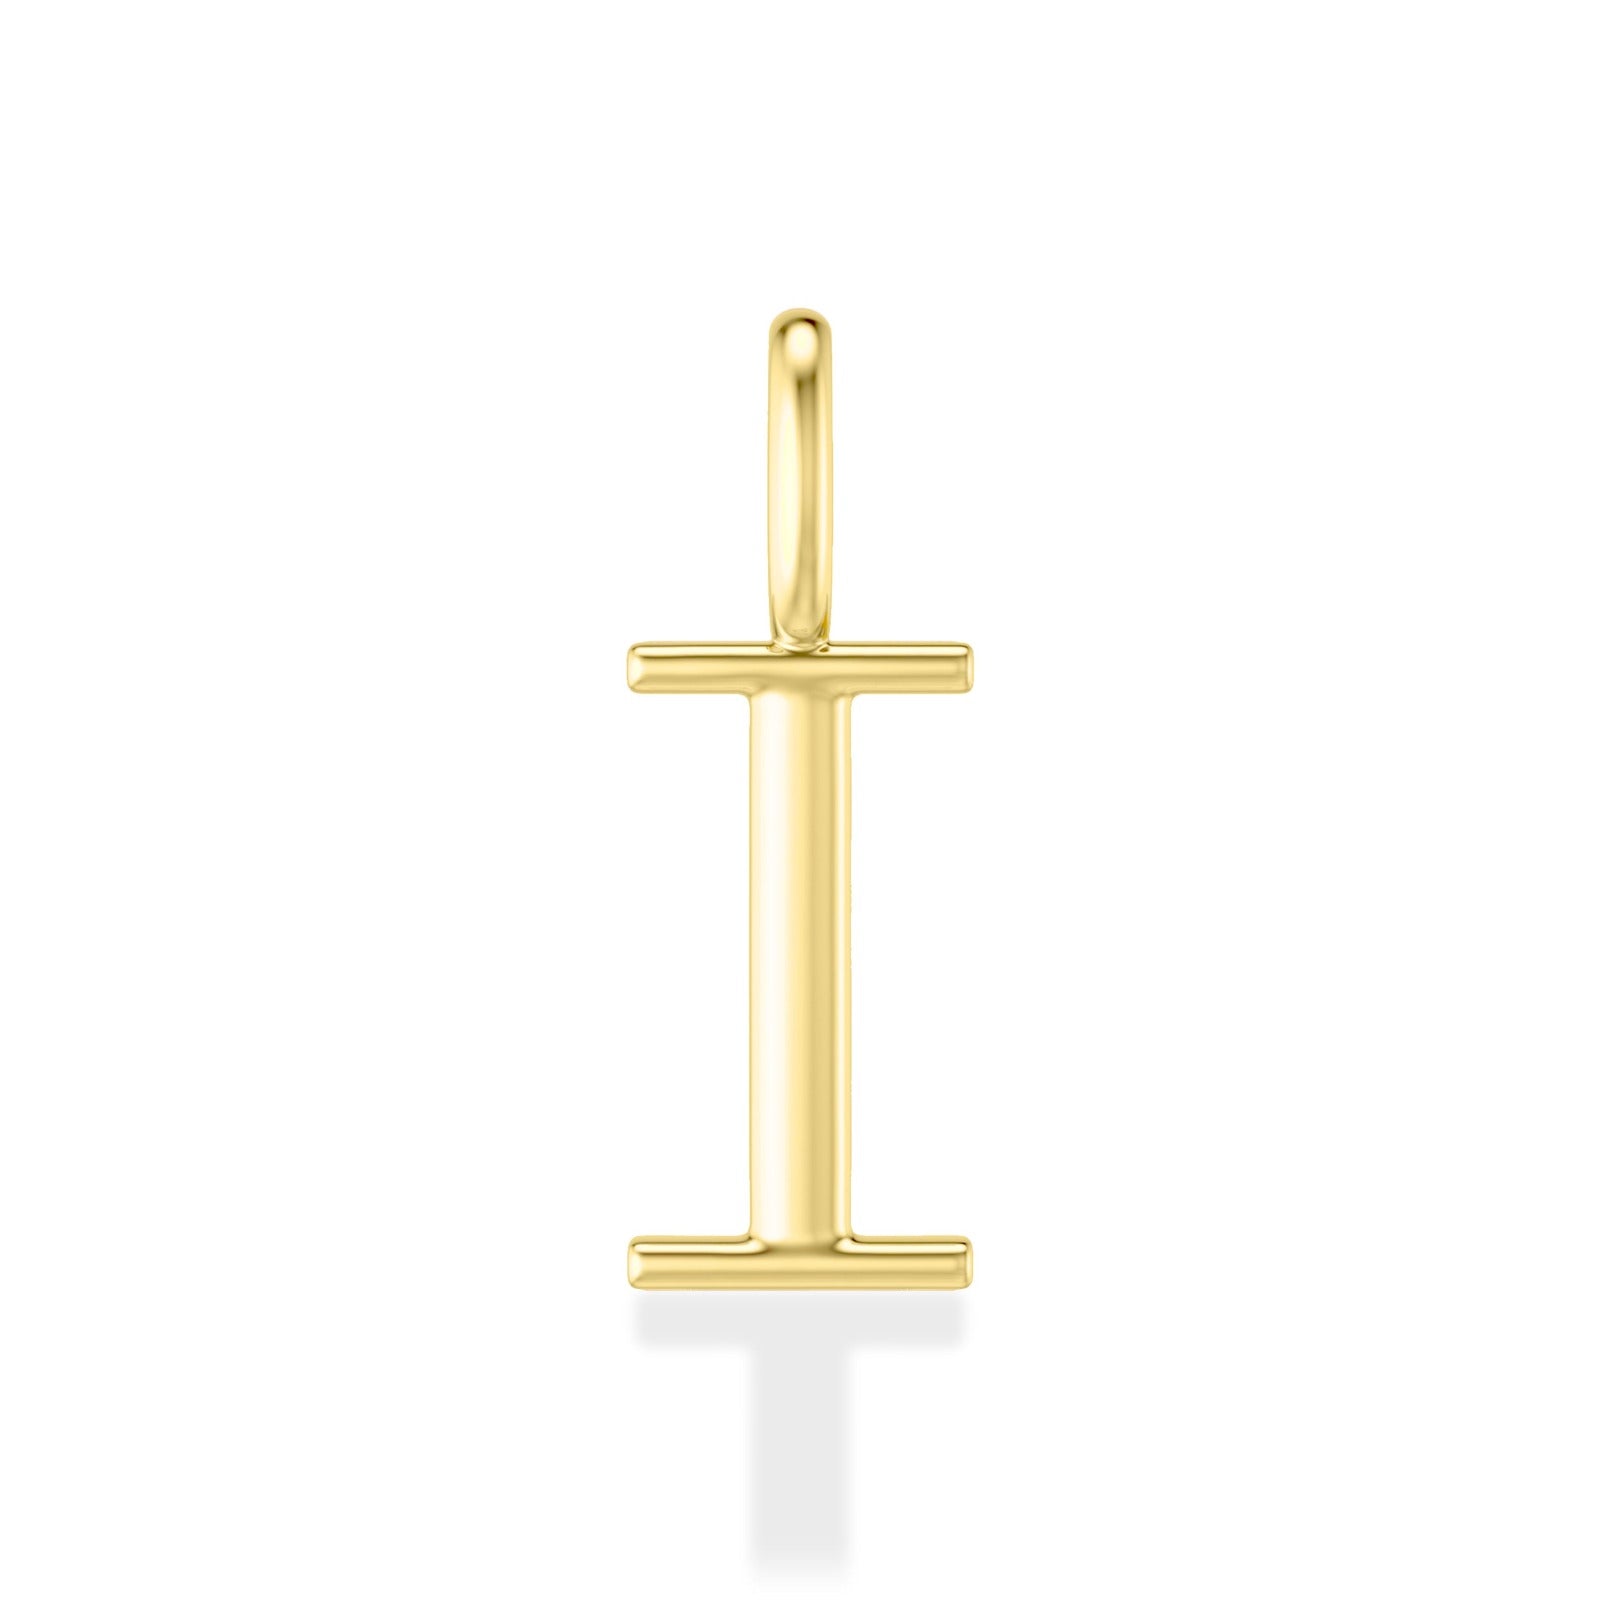 14K yellow gold I letter charm. 